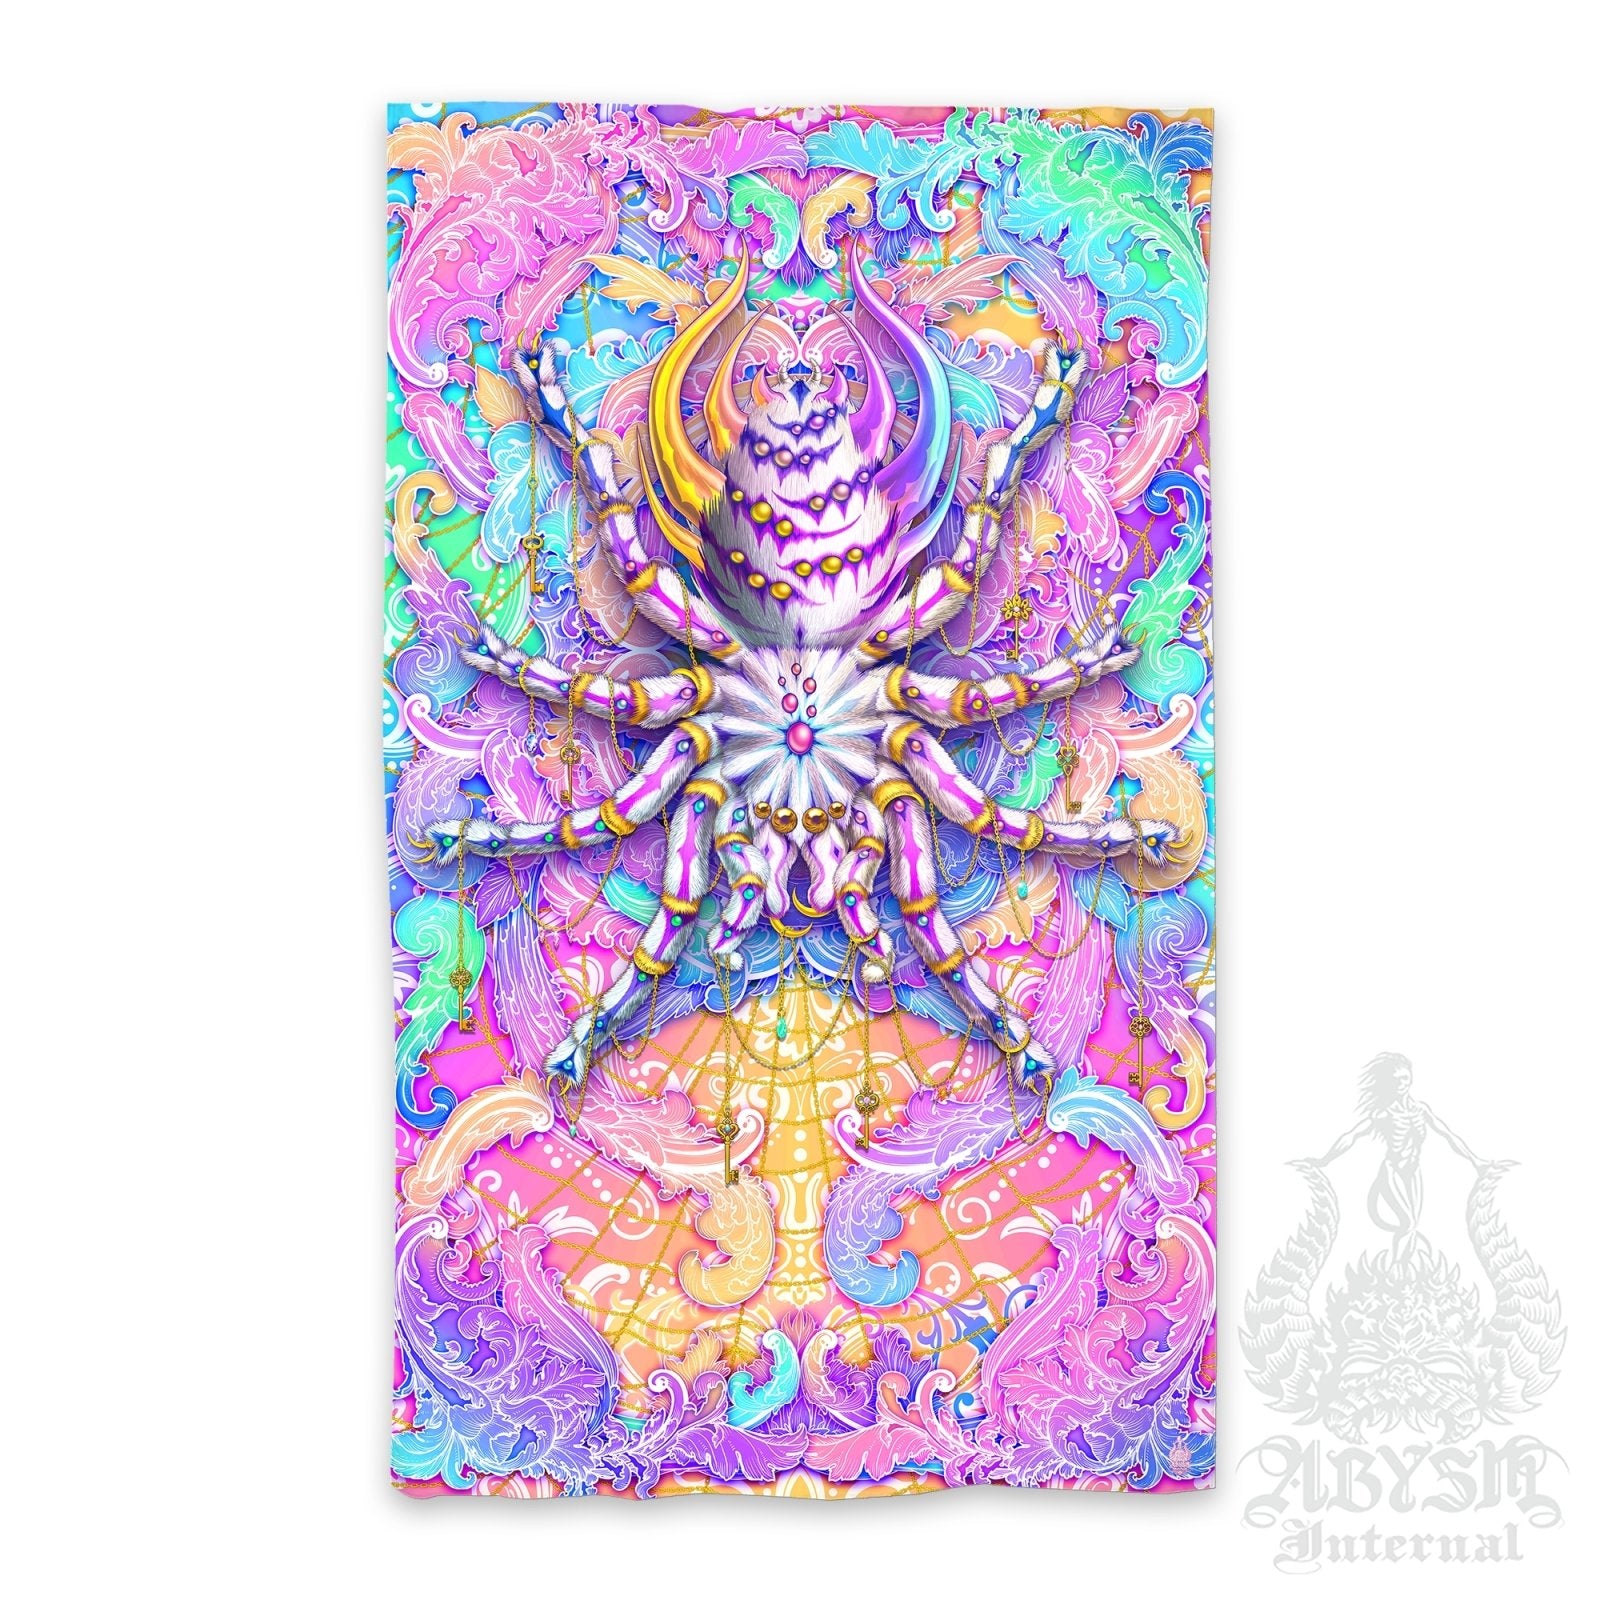 Asthetic Blackout Curtains, Long Window Panels, Psychedelic Art Print, Holographic Pastel Room Decor, Funky and Eclectic Home Decor - Tarantula Spider - Abysm Internal